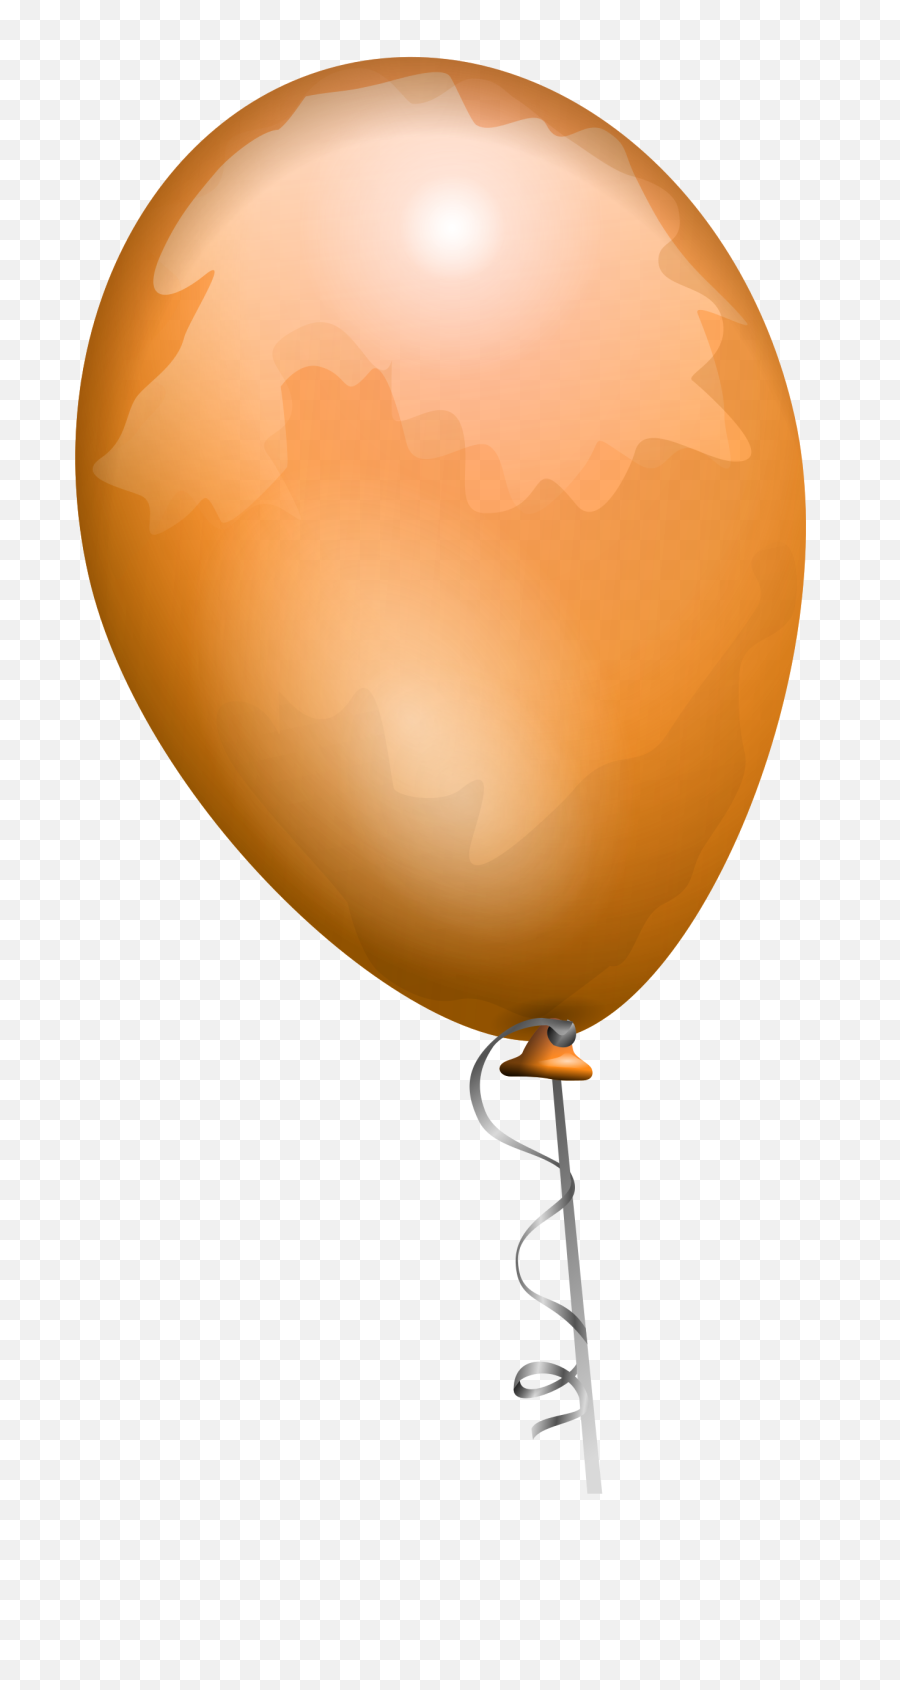 Balloons Background Clipart Transparent Png - 110k Cliparts,Balloons Background Png